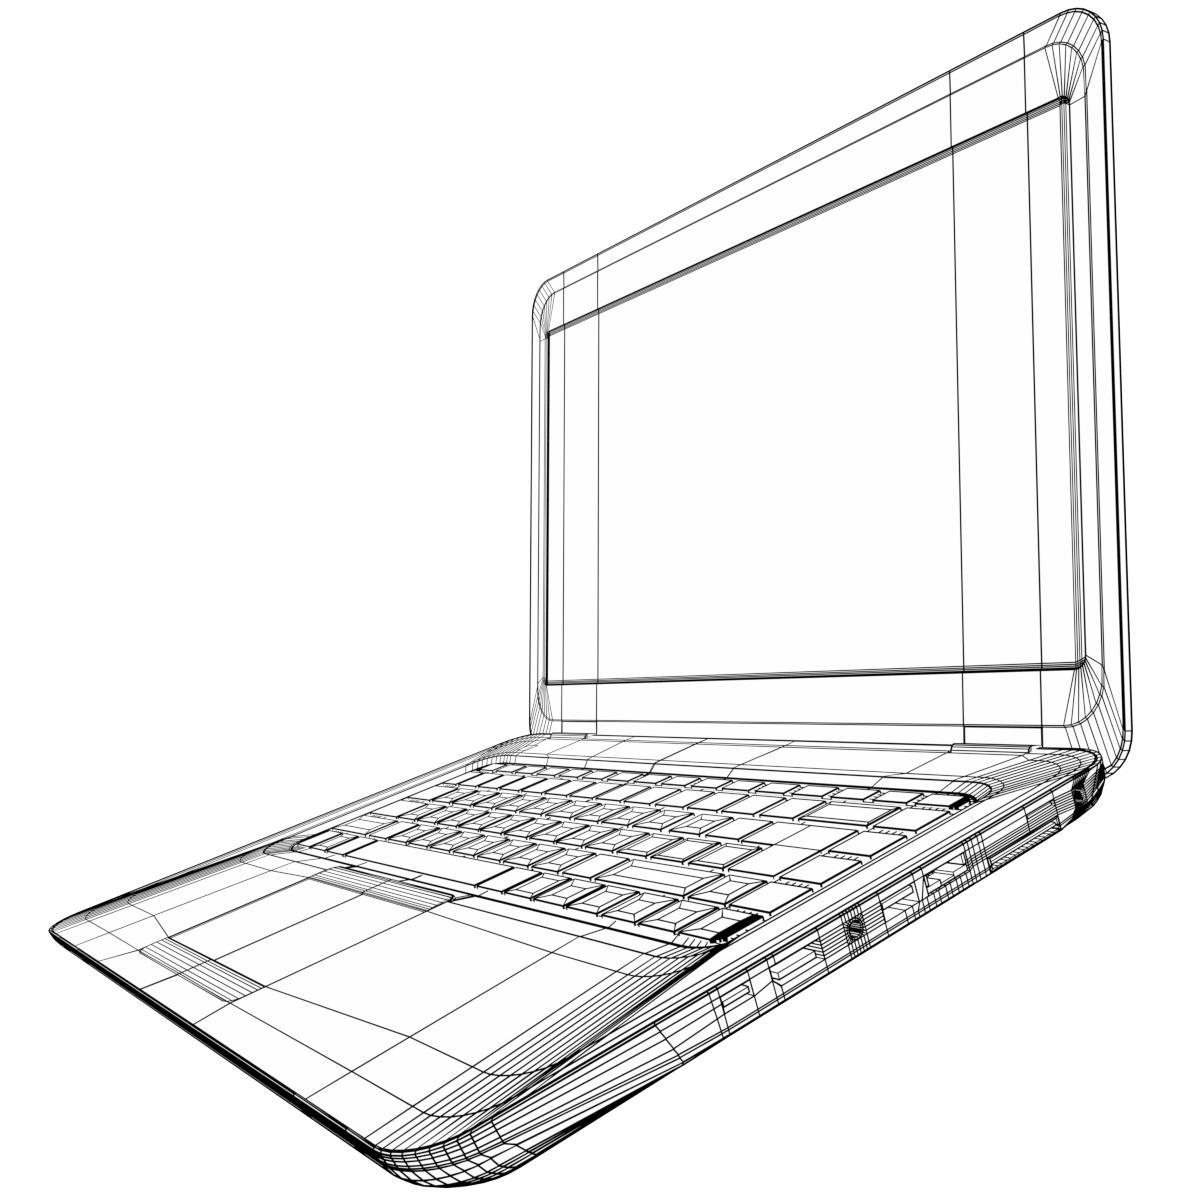 Laptop Computer Drawing at Free for